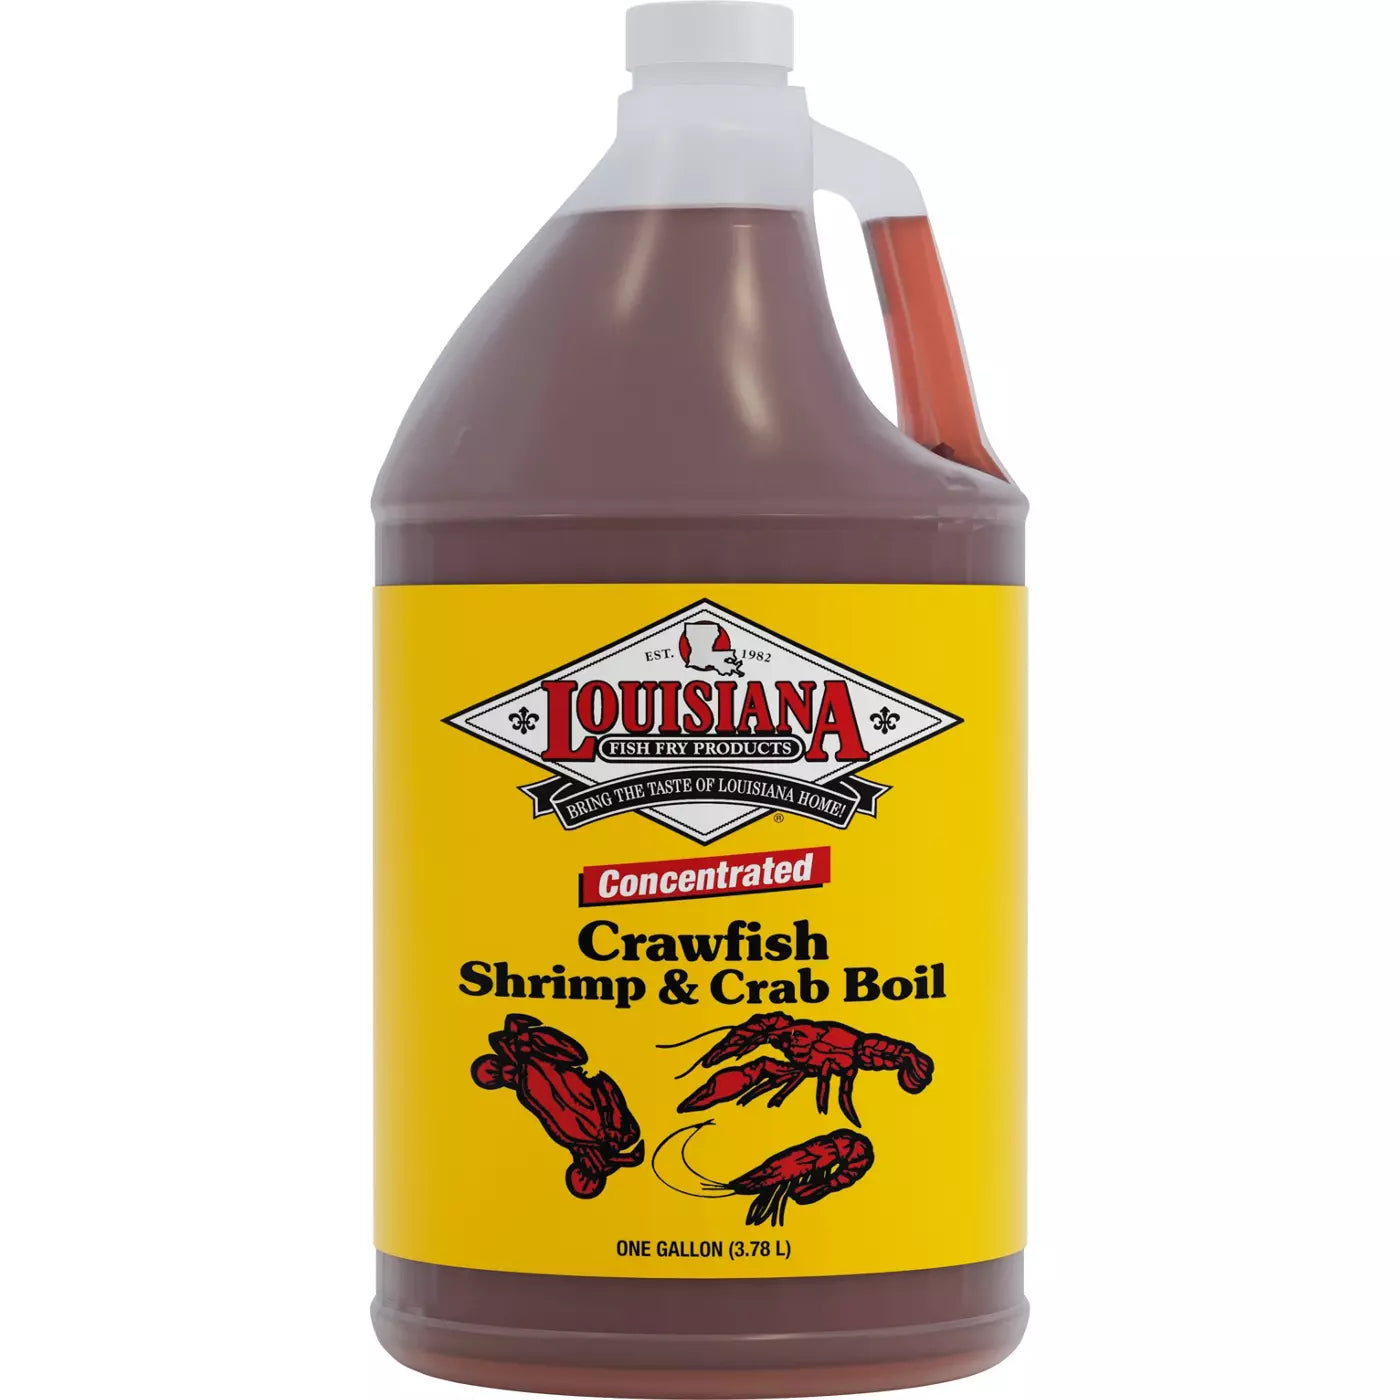 Louisiana Fish Fry Products Concentrated Crawfish Crab Shrimp Boil